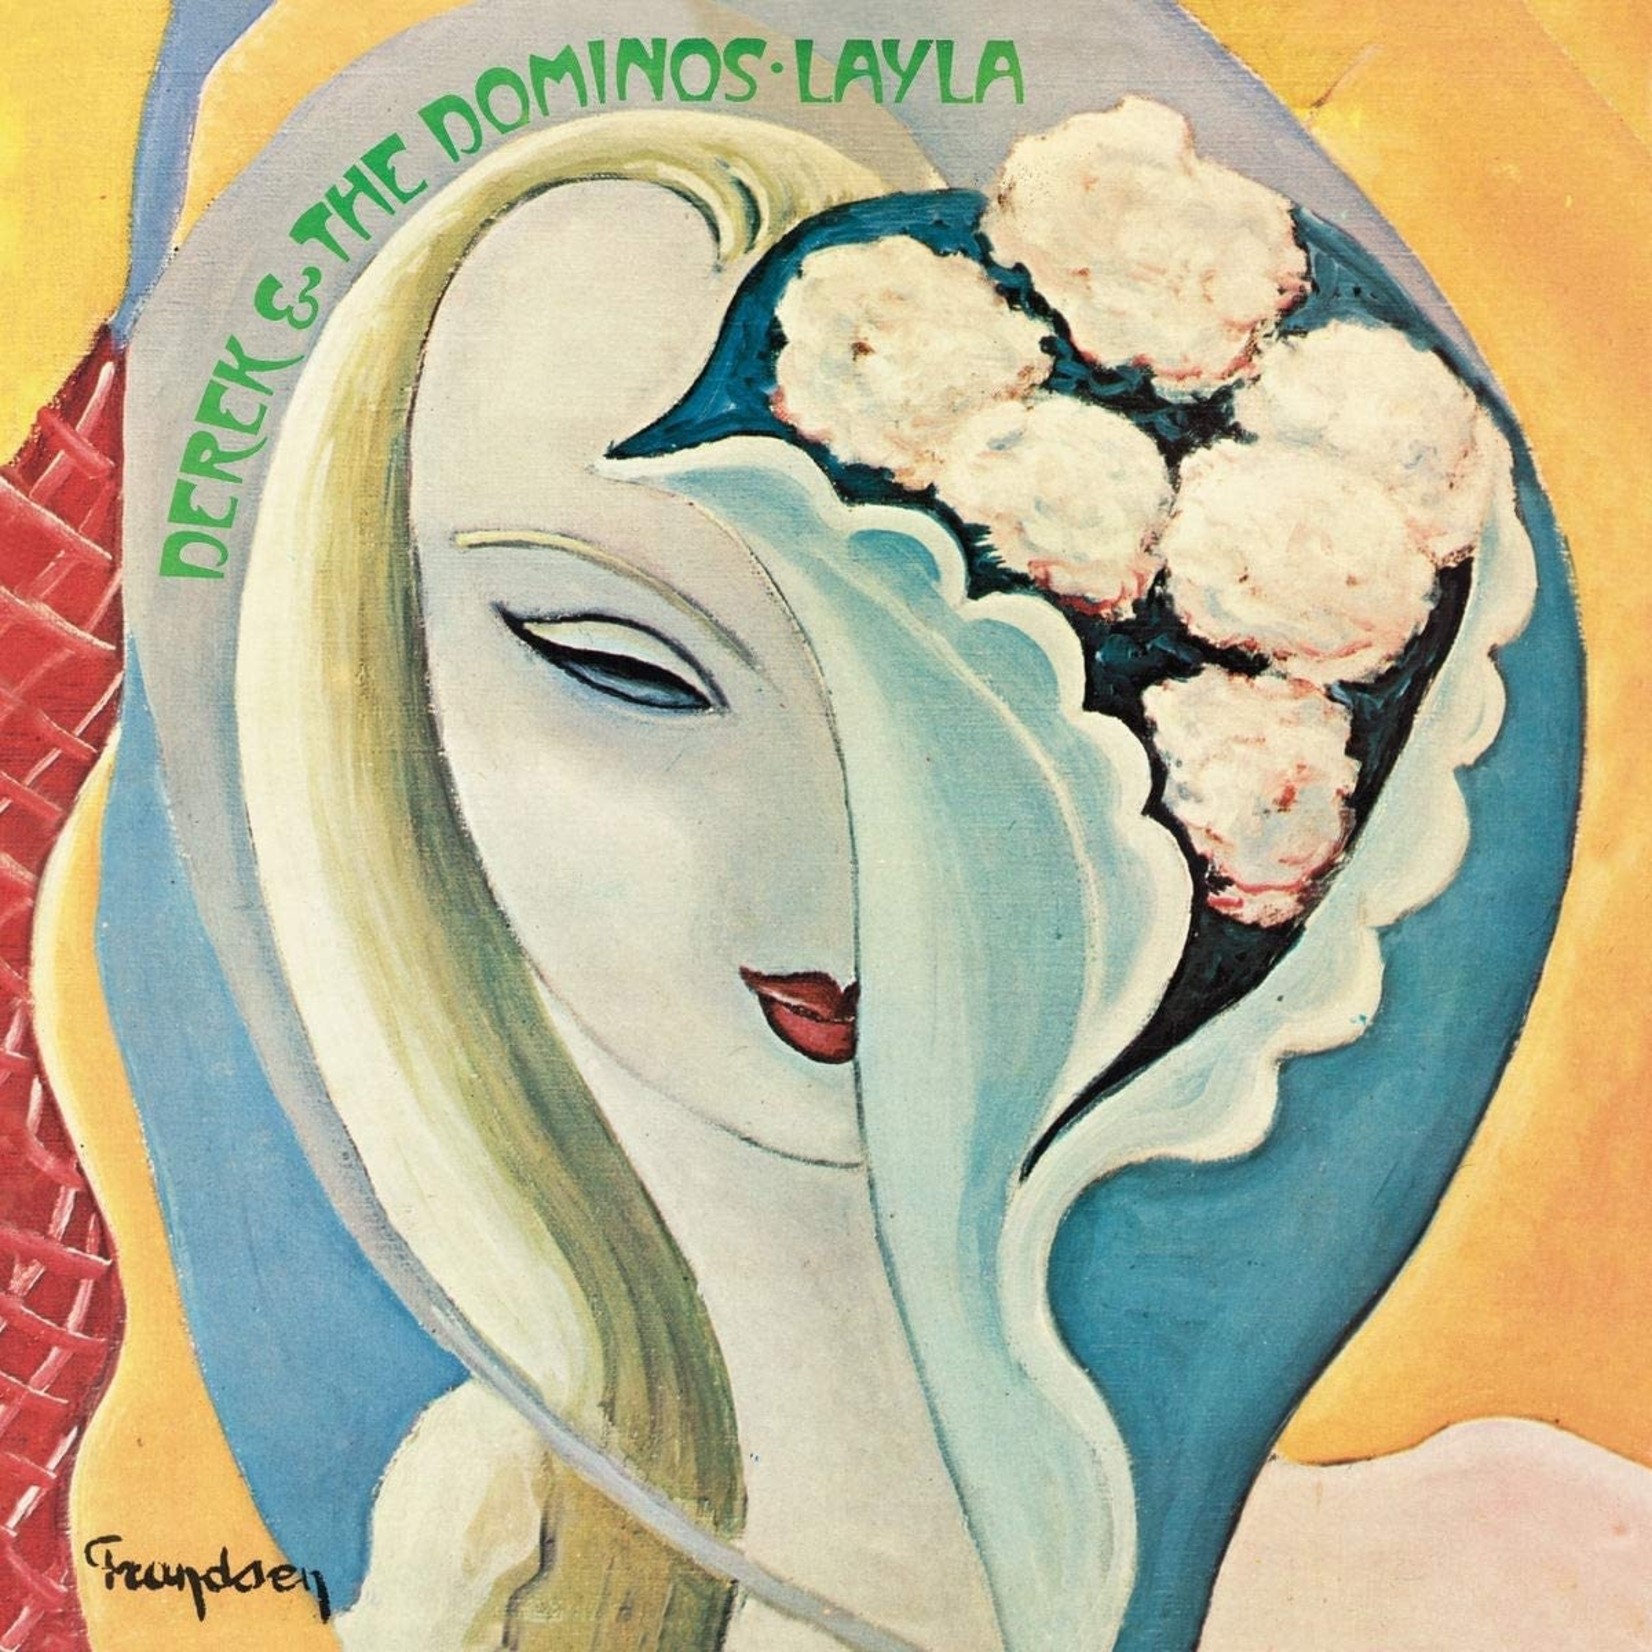 Vinyl Derek And The Dominos -Layla And Other Assorted Love Songs (50th Anniversary 4LP Half-Speed Master Vinyl Edition).